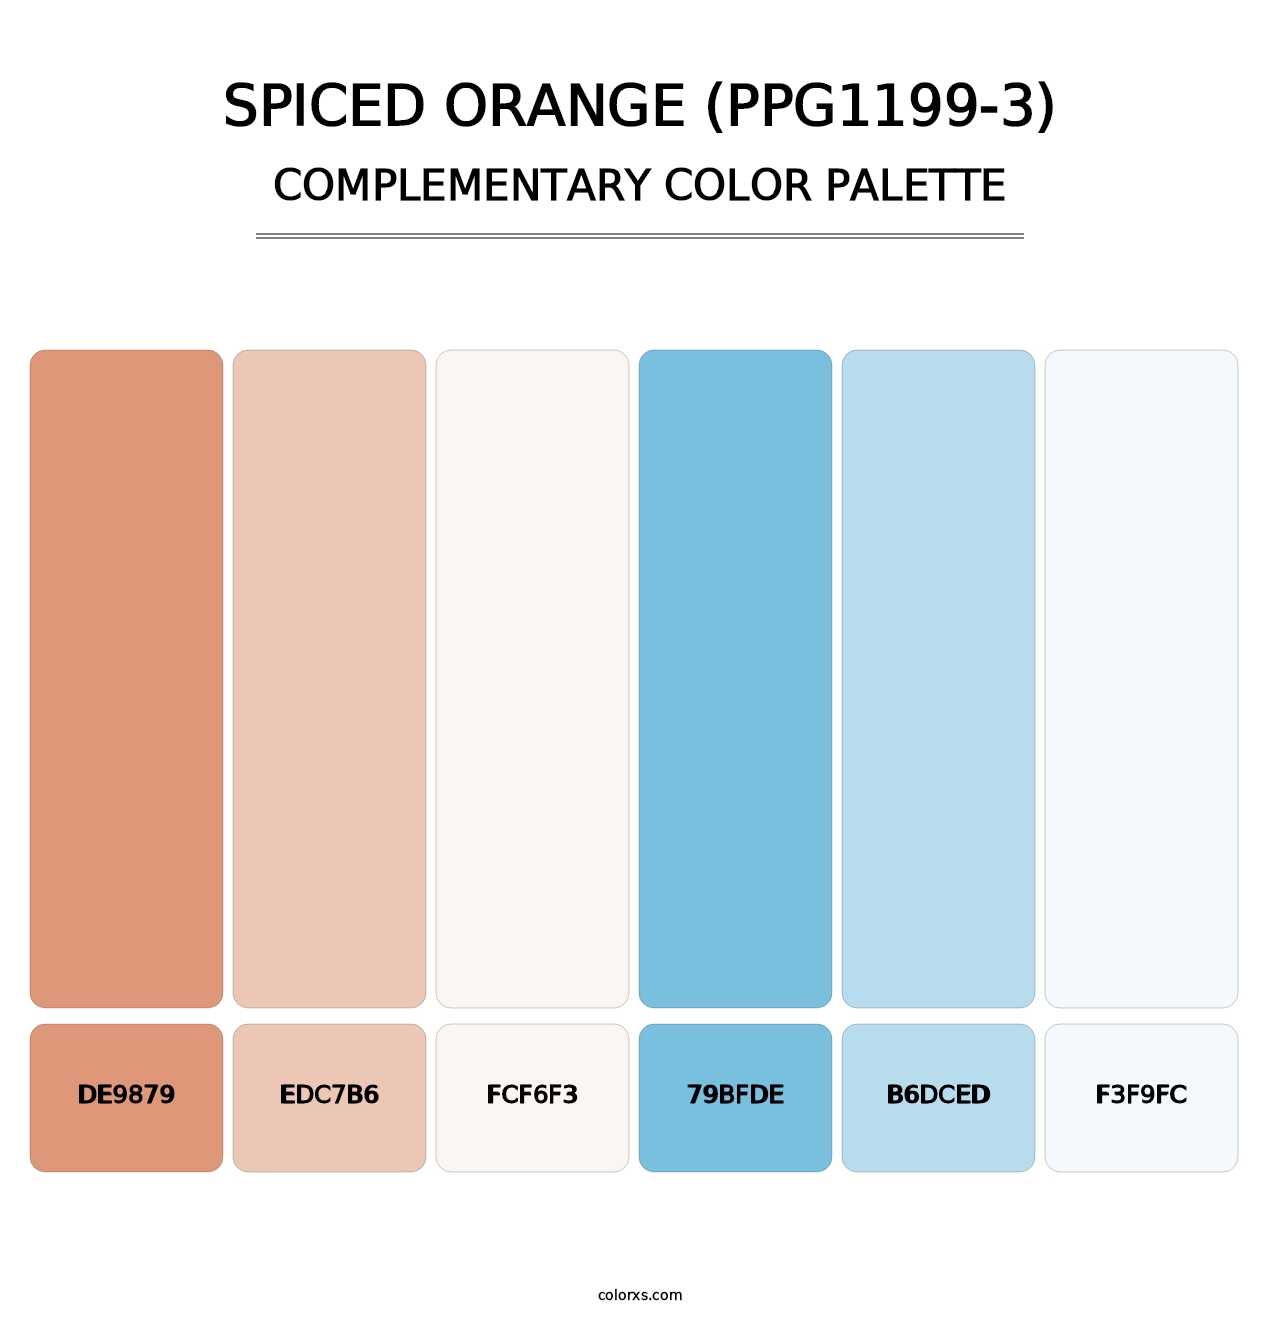 Spiced Orange (PPG1199-3) - Complementary Color Palette